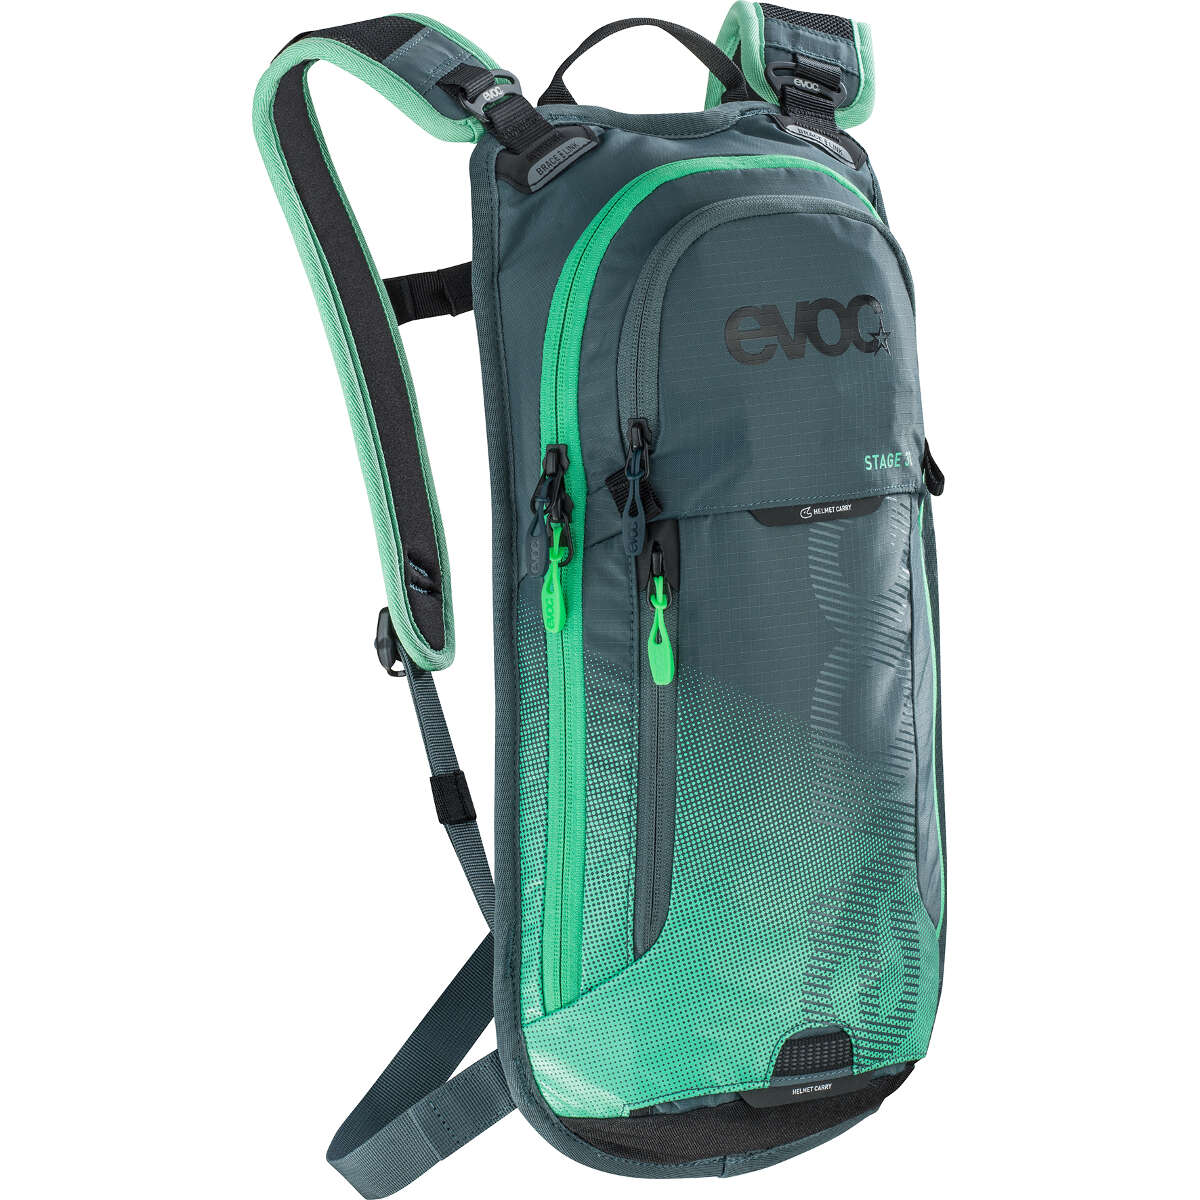 Evoc Backpack with Hydration System Compartment Stage Slate/Neon Green, 3 Liter, including hydration bladder